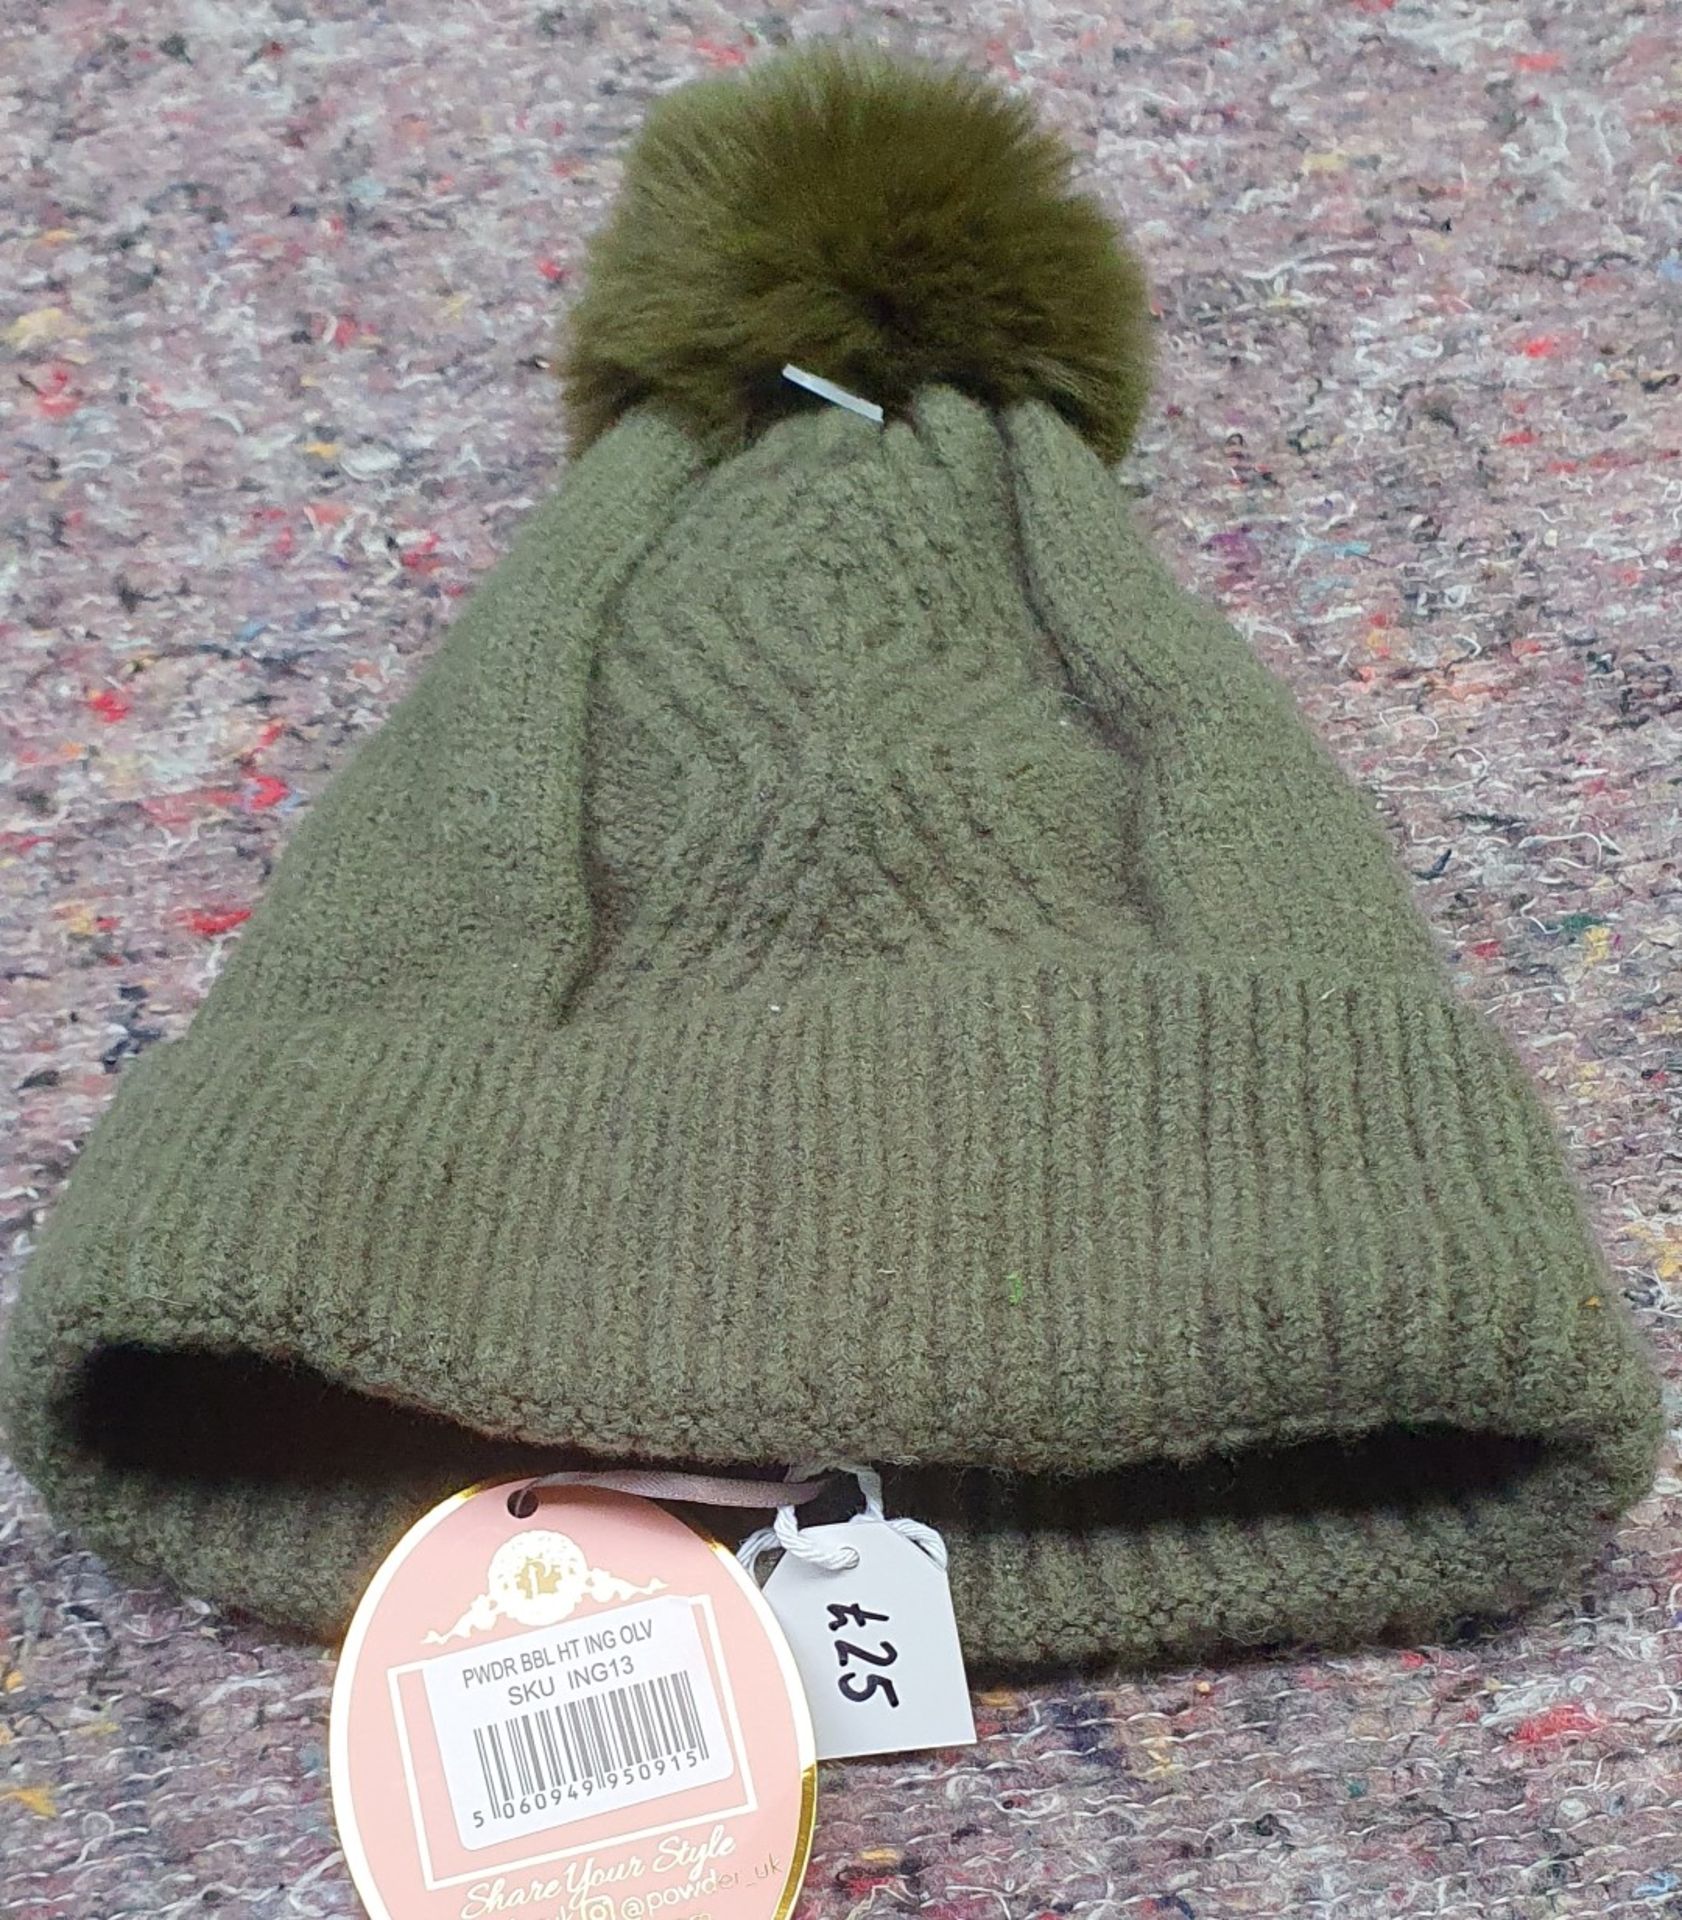 13 x Assorted Bobble Hats and Woolly Gloves by From The Source - New Stock - Ref: TCH236 - CL840 - - Image 3 of 24